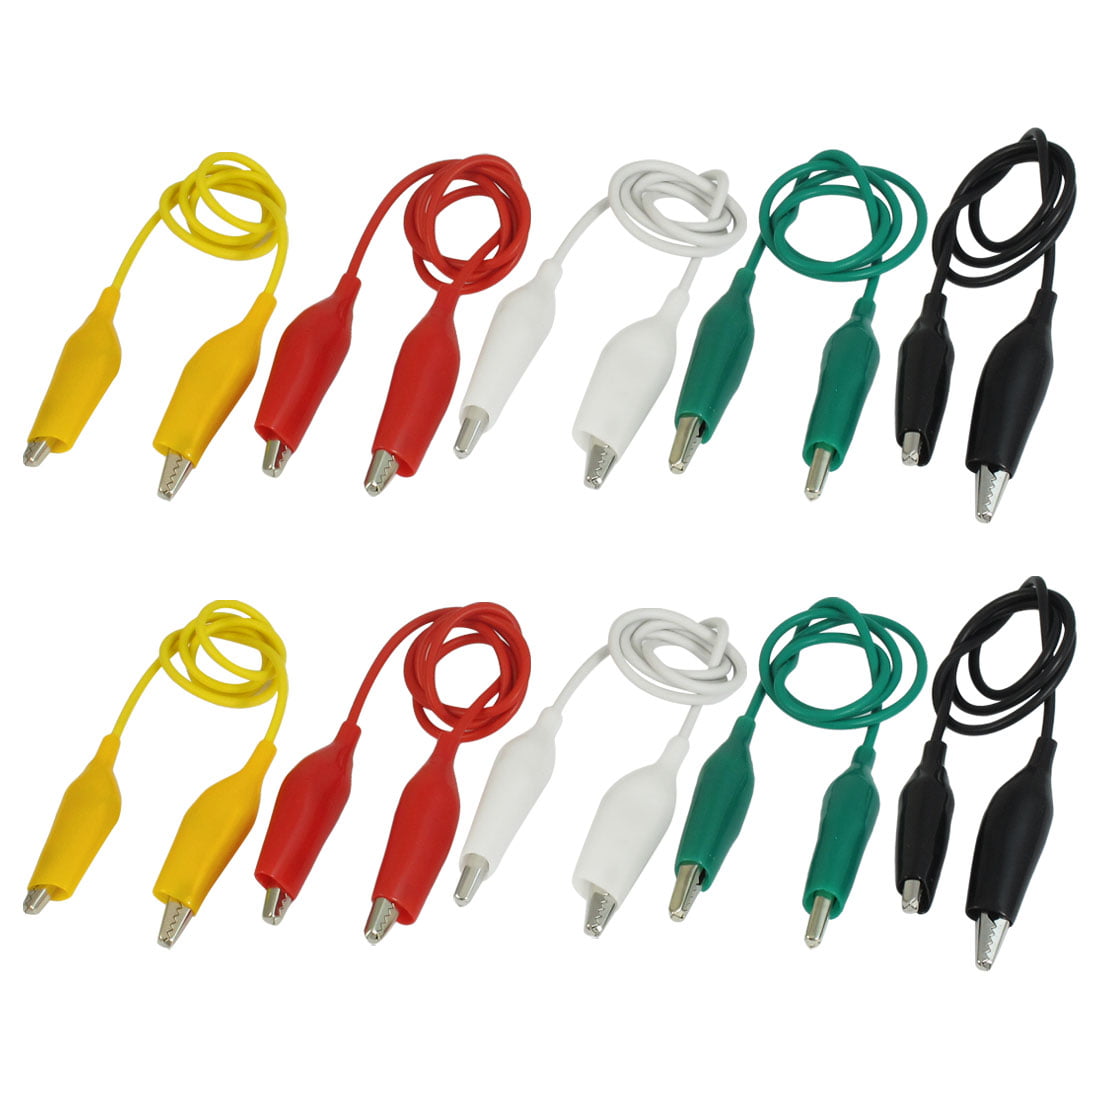 10pcs Silicone High Voltage Alligator Clip to Alligator Clip Test Leads Cable 